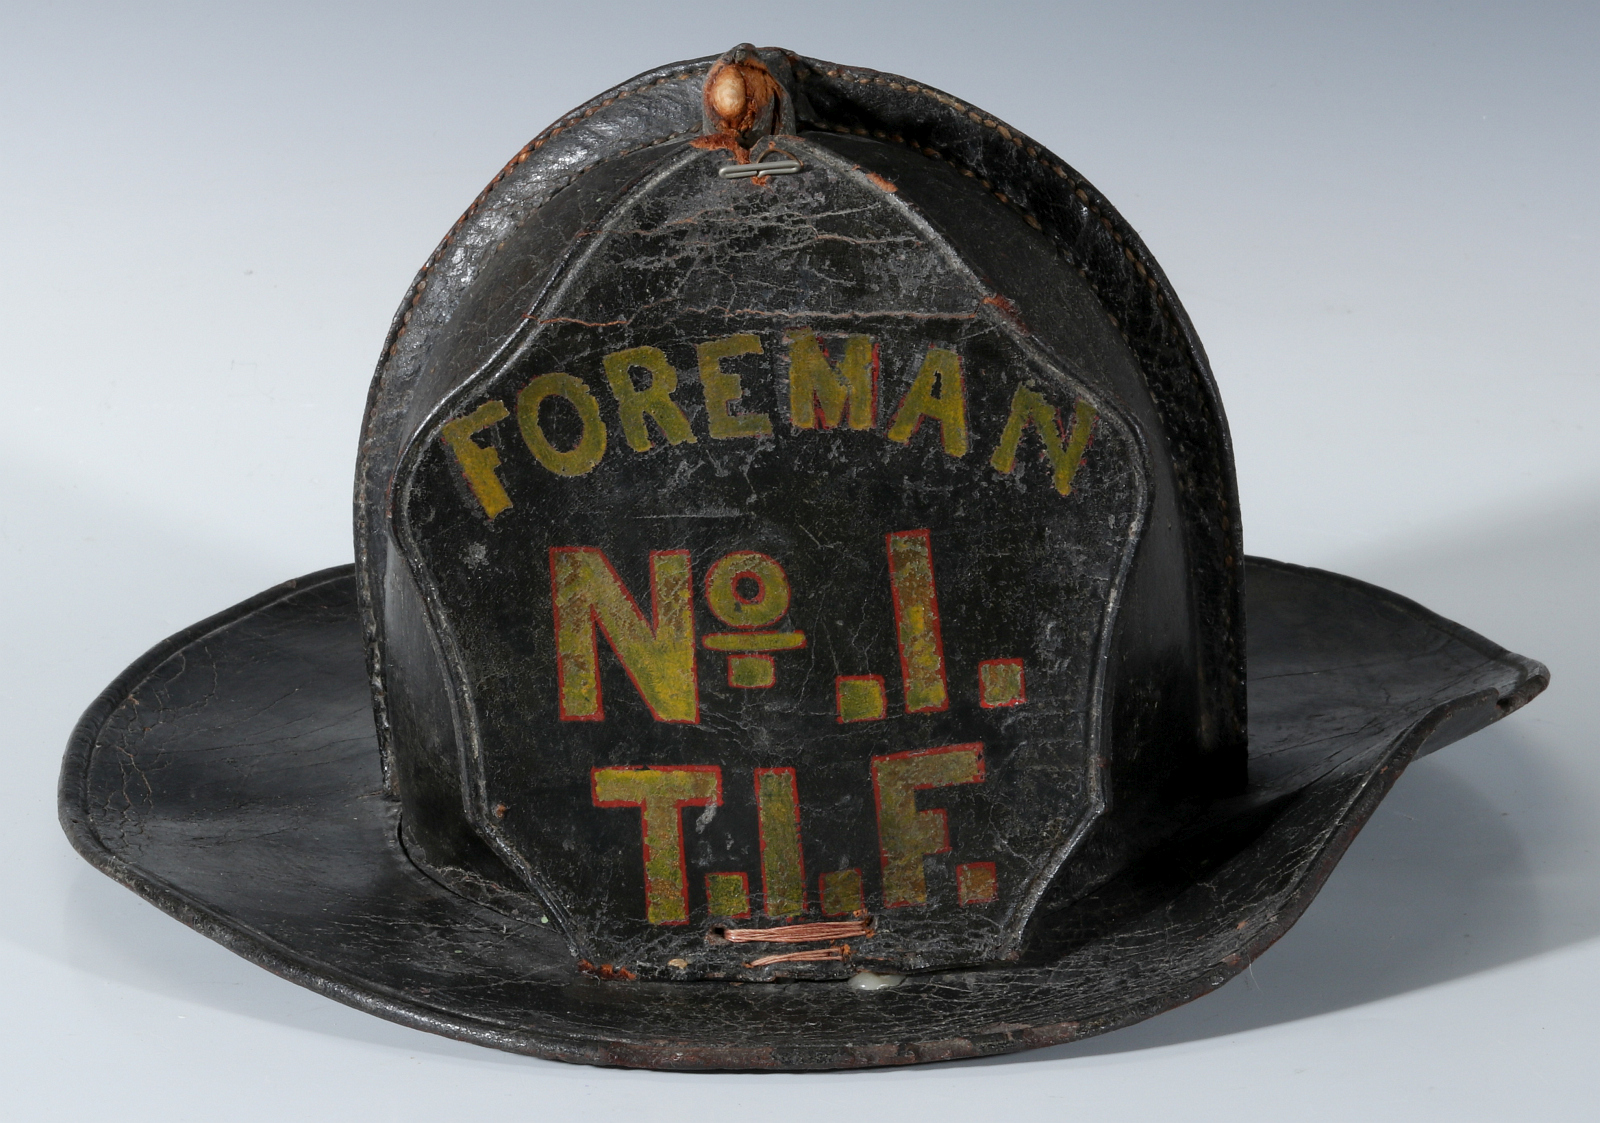 AN EARLY FOREMAN LEATHER FIRE HELMET